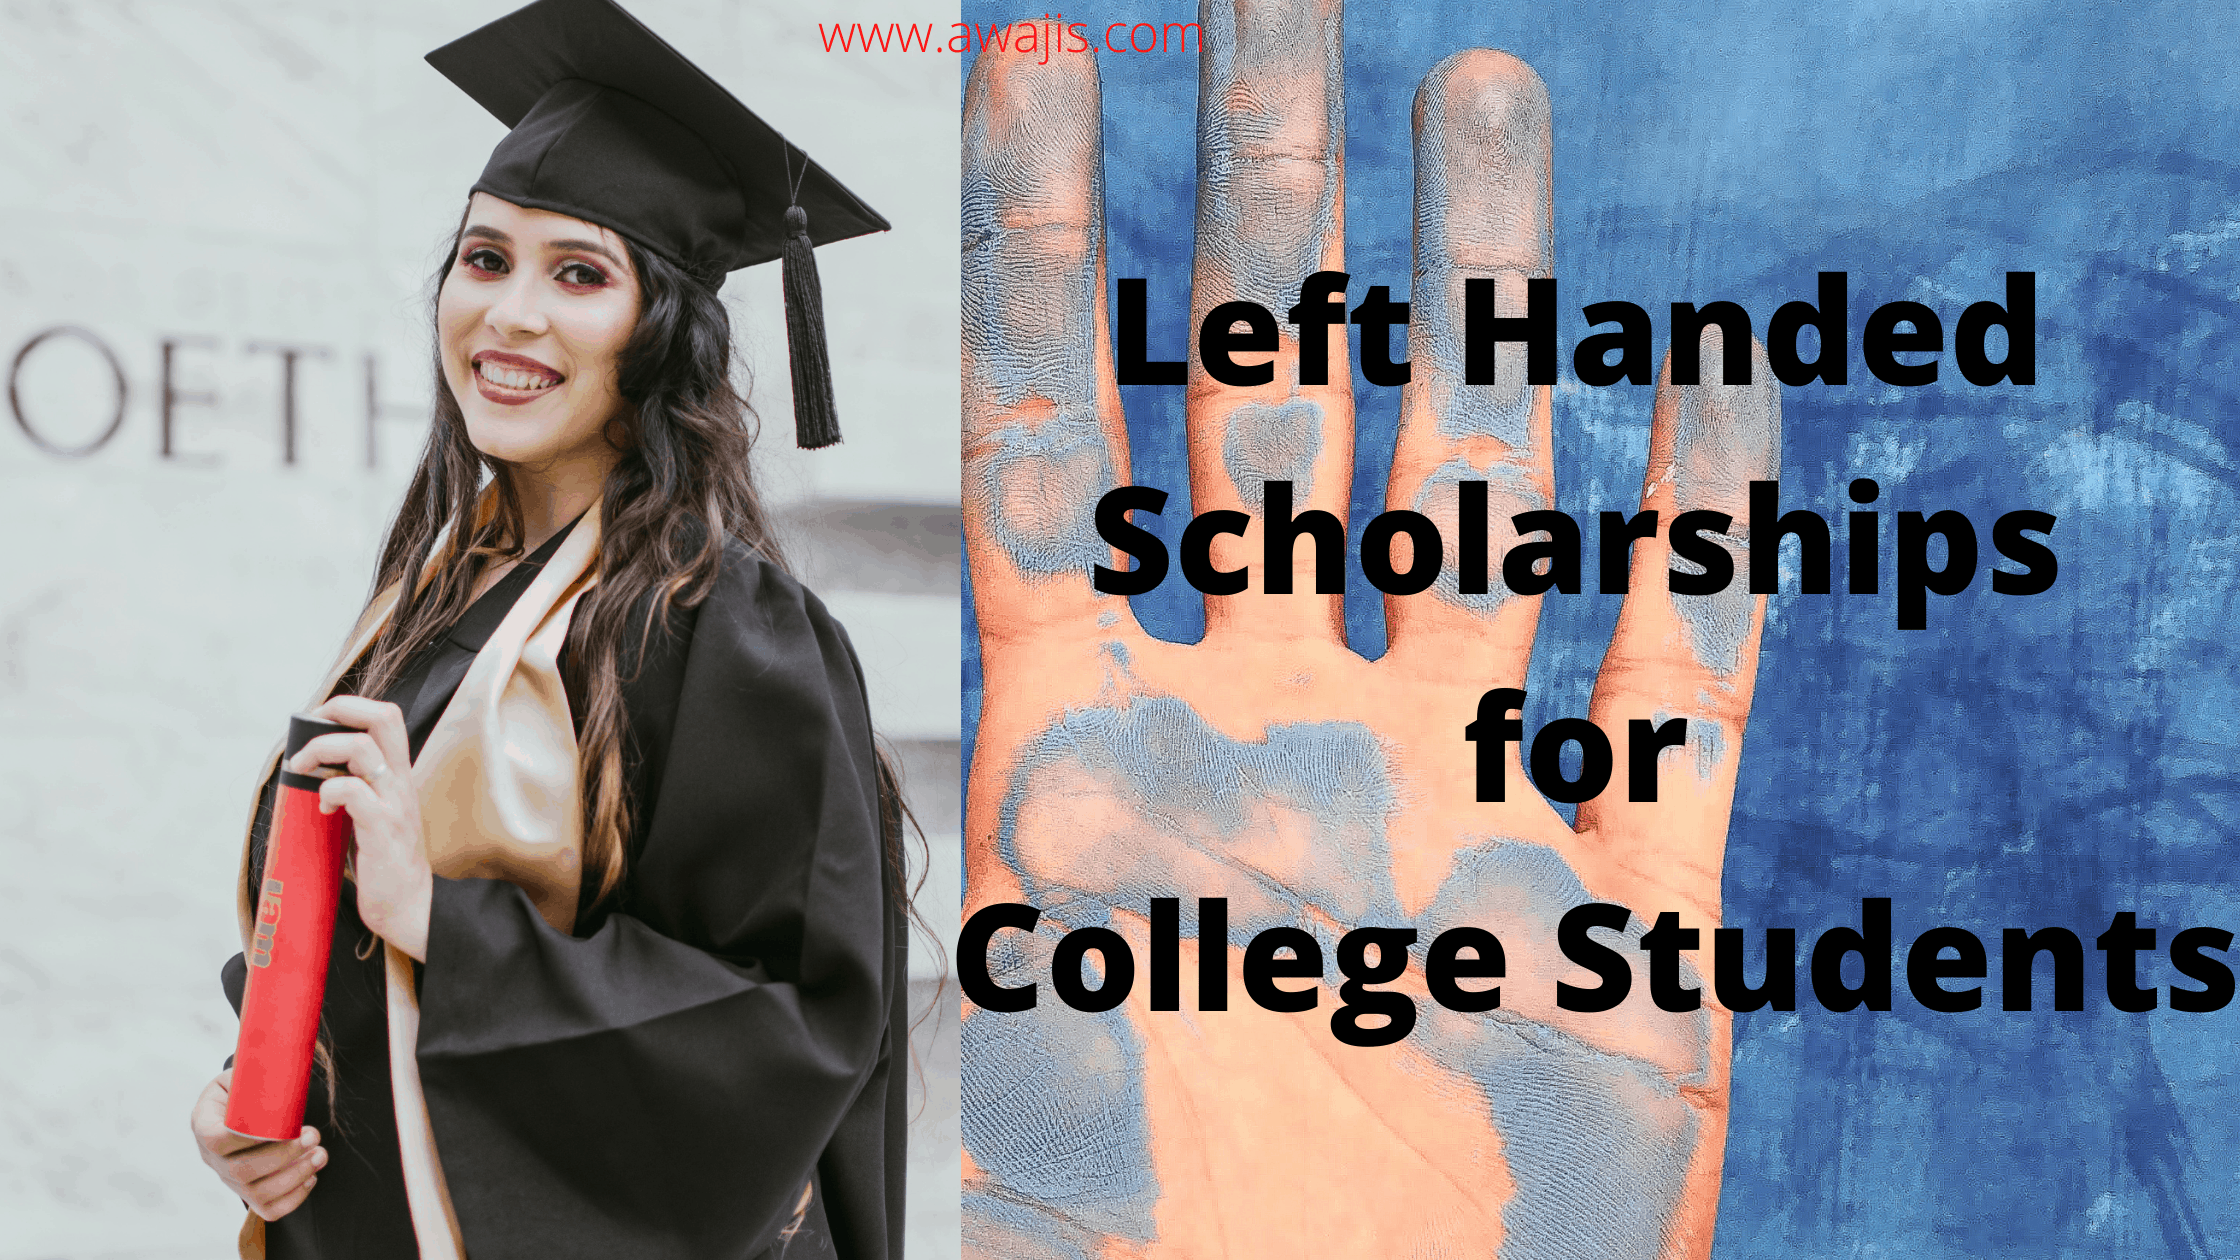 Top 10 LeftHanded Scholarships for College Students